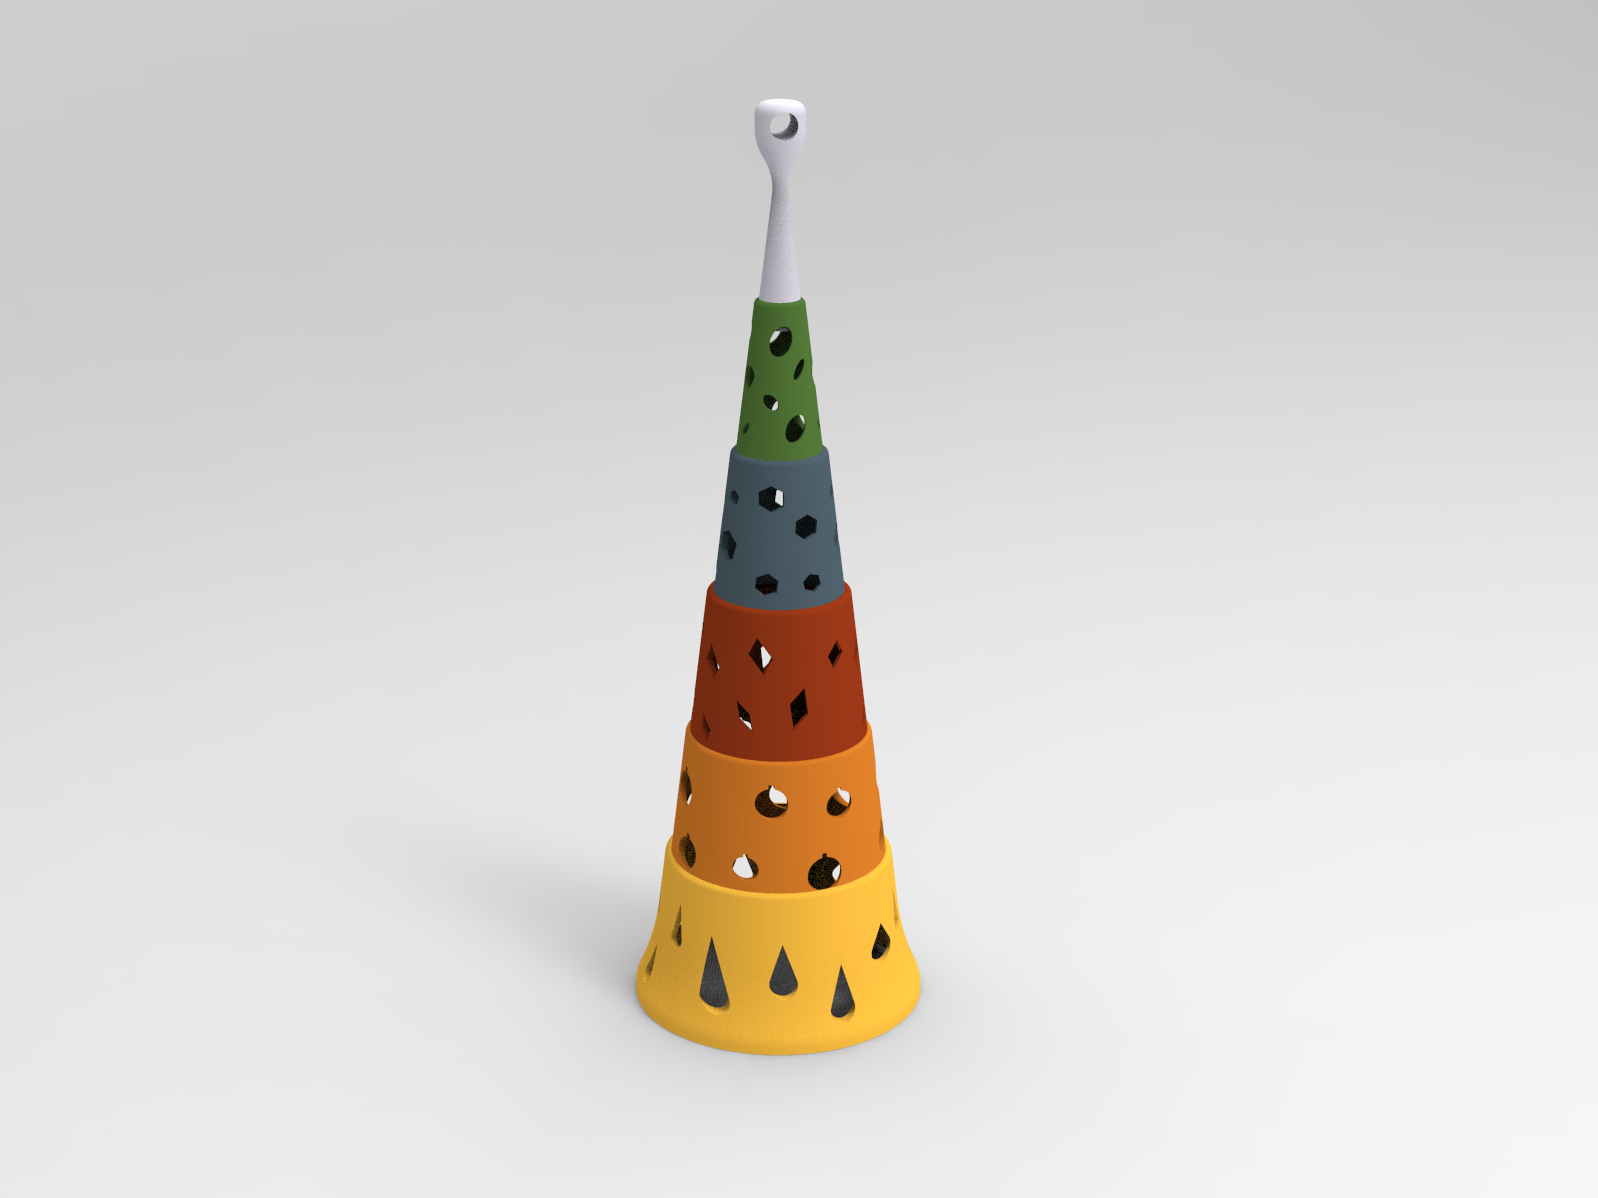 YOLKA - A Collapsible Christmas Tree - Print in Place!